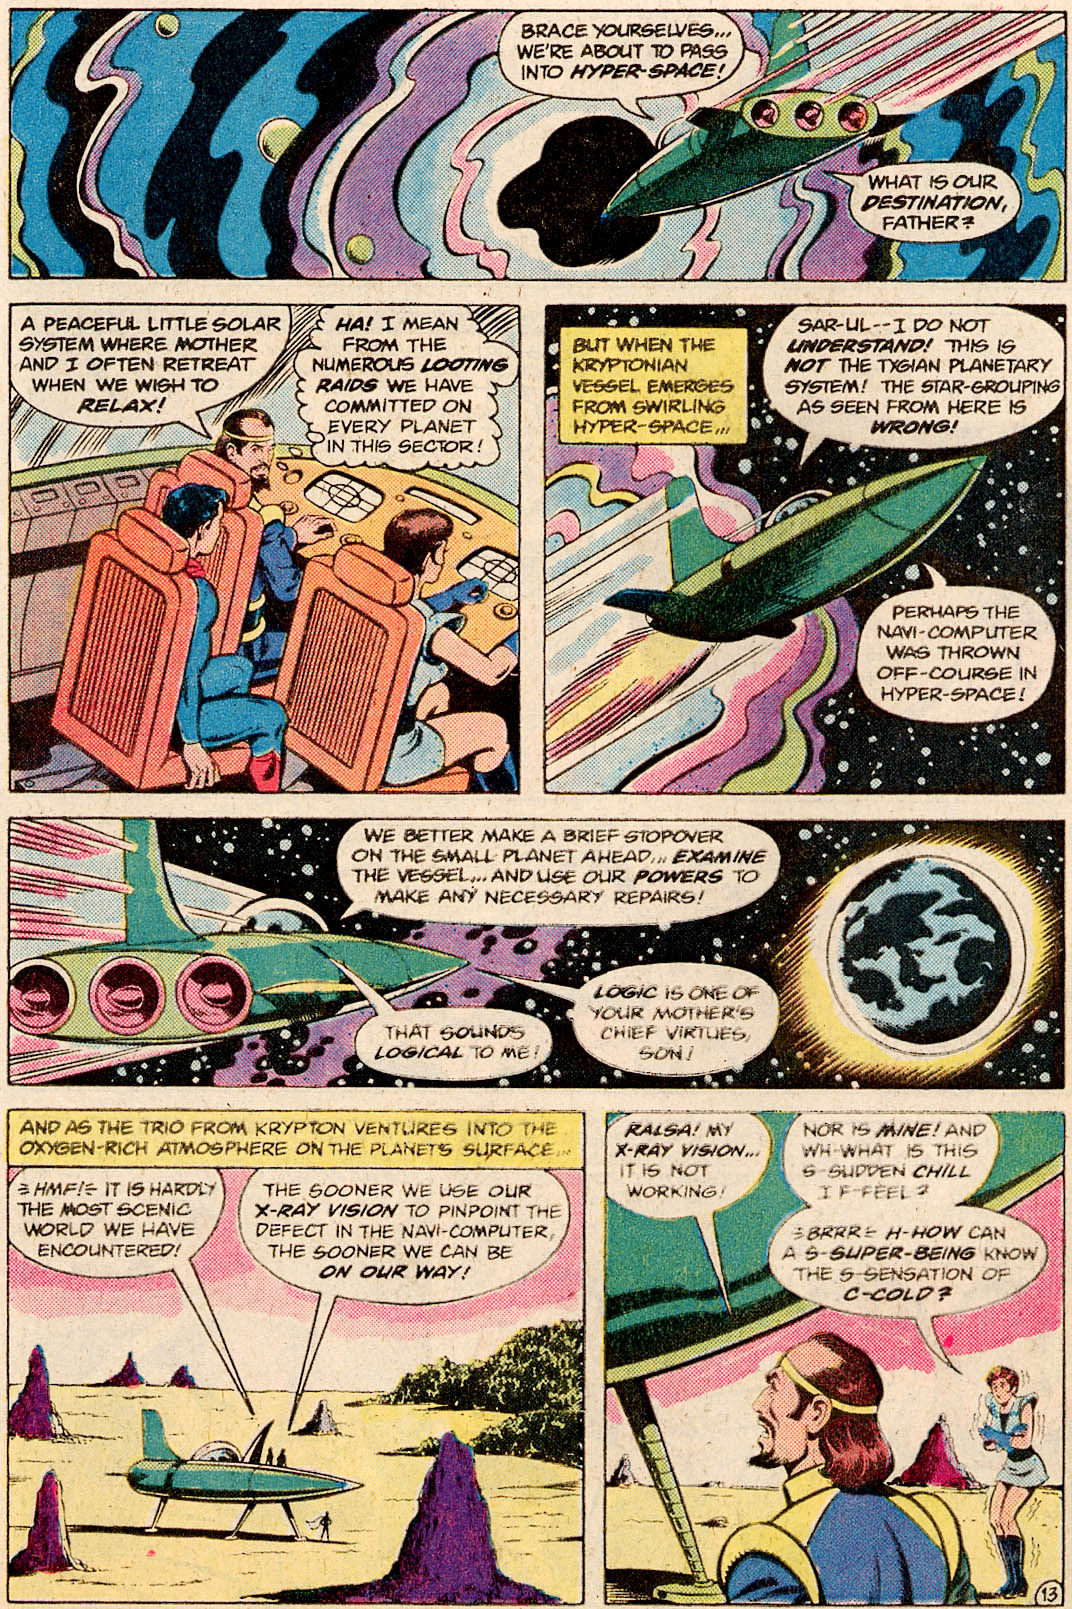 The New Adventures of Superboy 28 Page 13